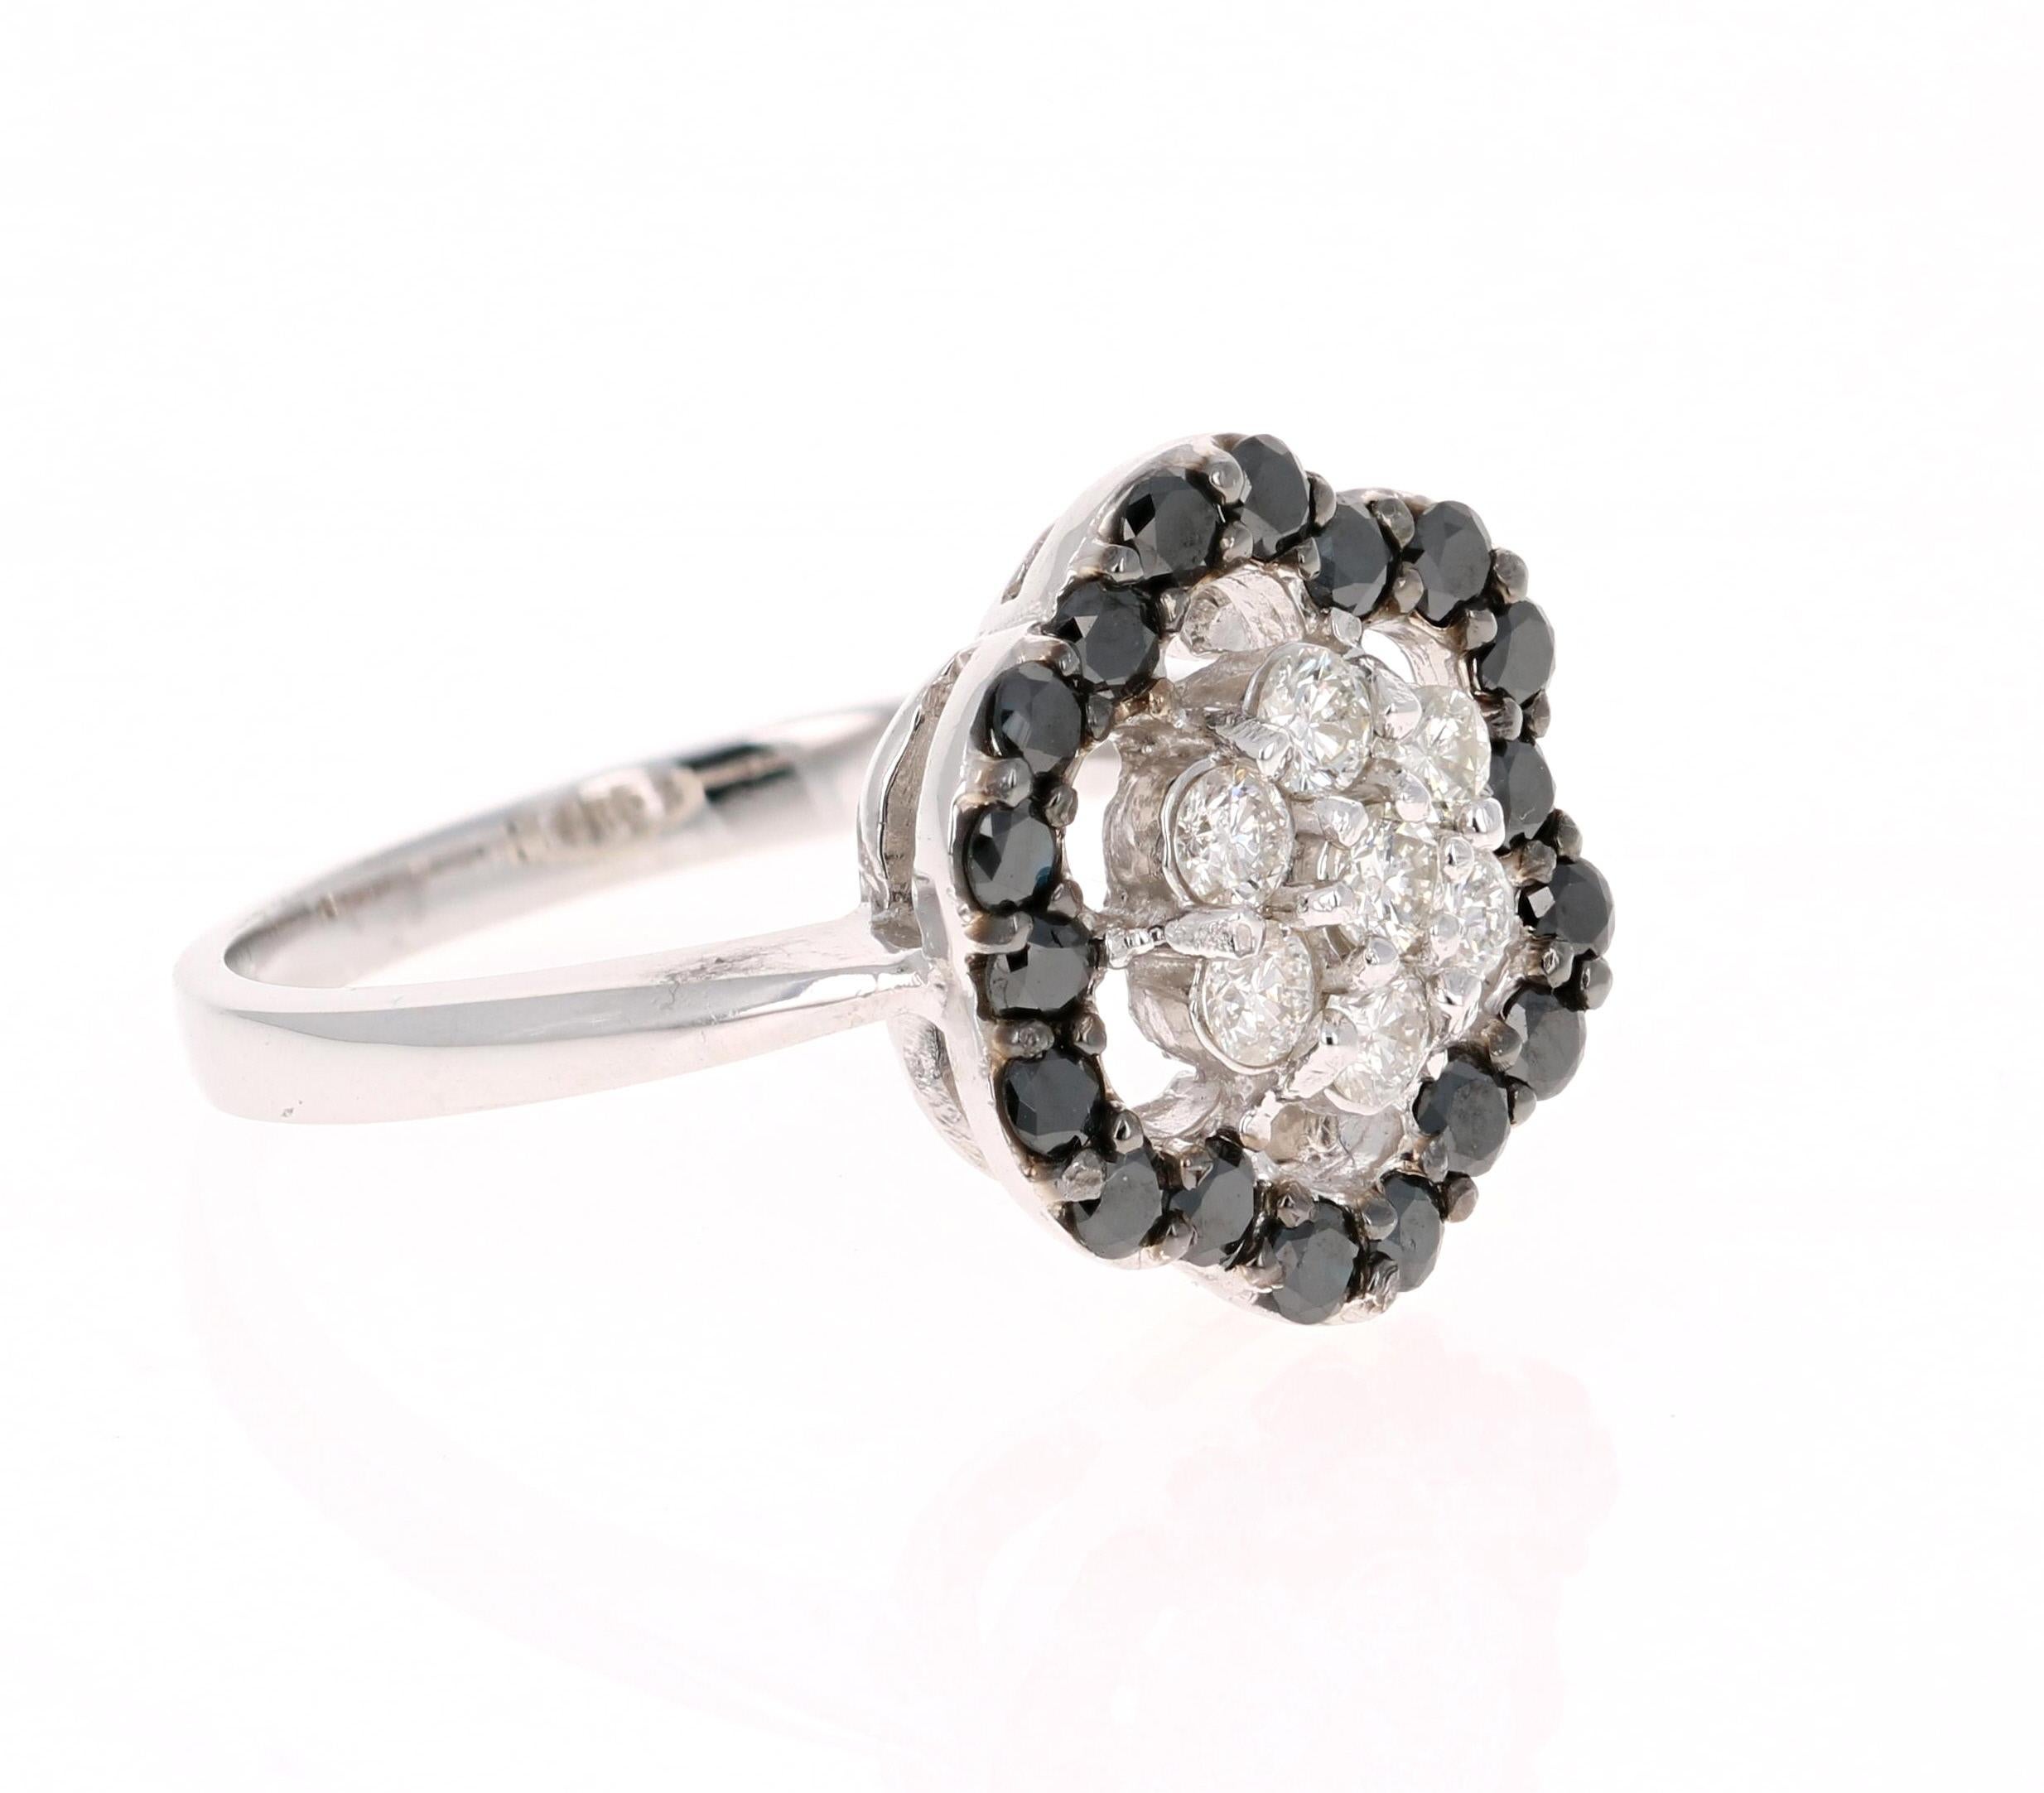 The flower design has 7 Round Cut Diamonds that weigh 0.37 carats and the floating halo has 18 Black Round Cut Diamonds that weigh 0.62 carats. The total carat weight of the ring is 0.99 Carats. 

It is beautifully set in 14 Karat White Gold and is